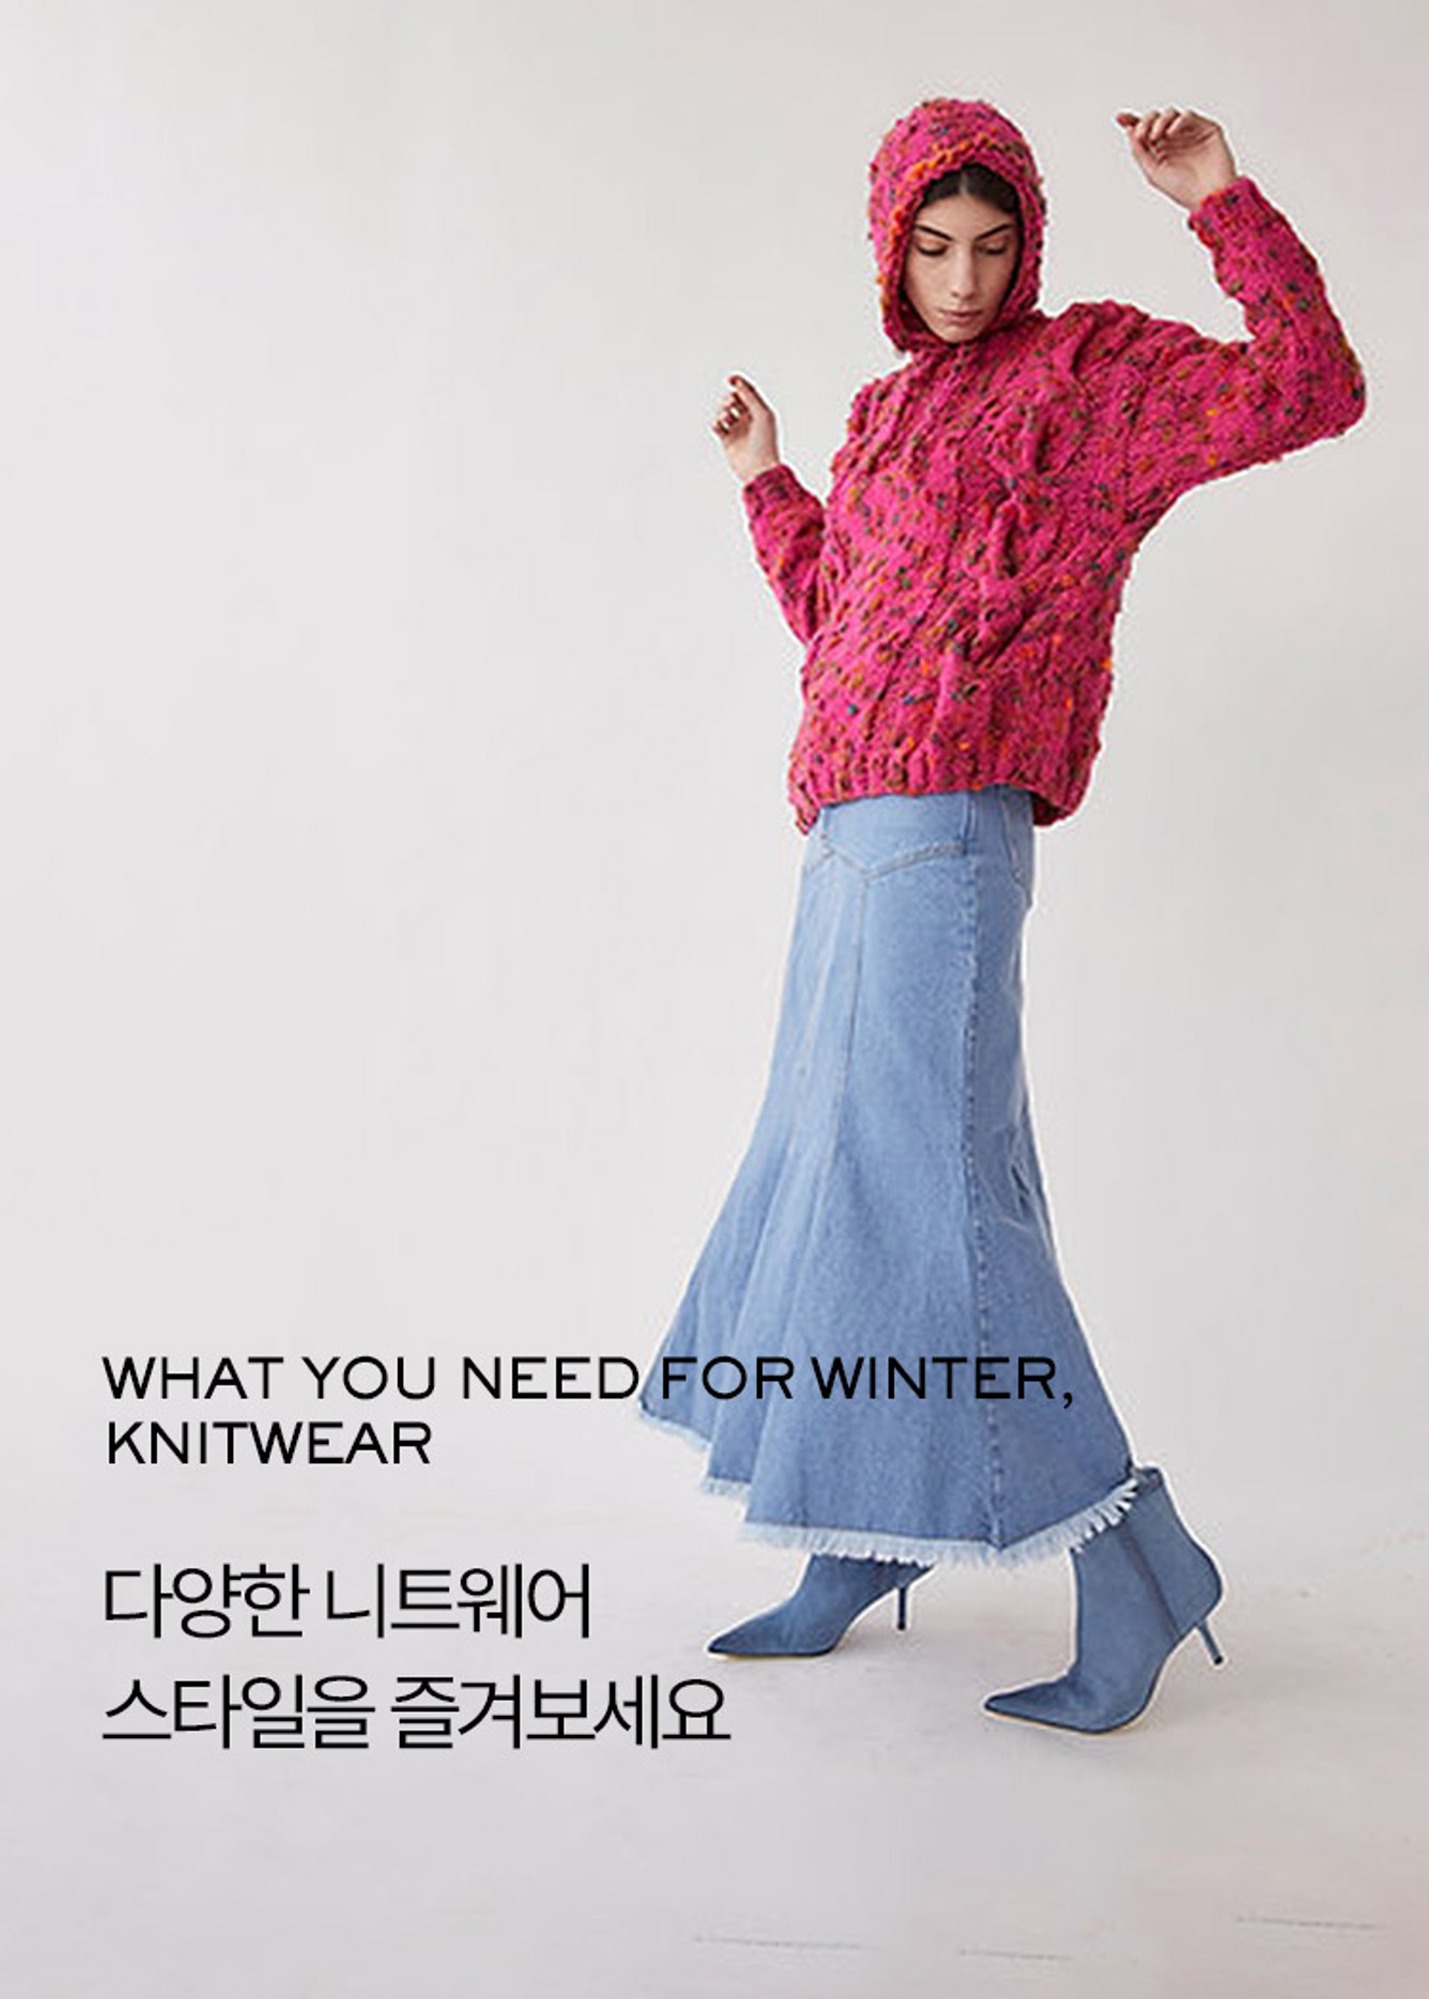 WHAT YOU NEED FOR WINTER, KNITWEAR